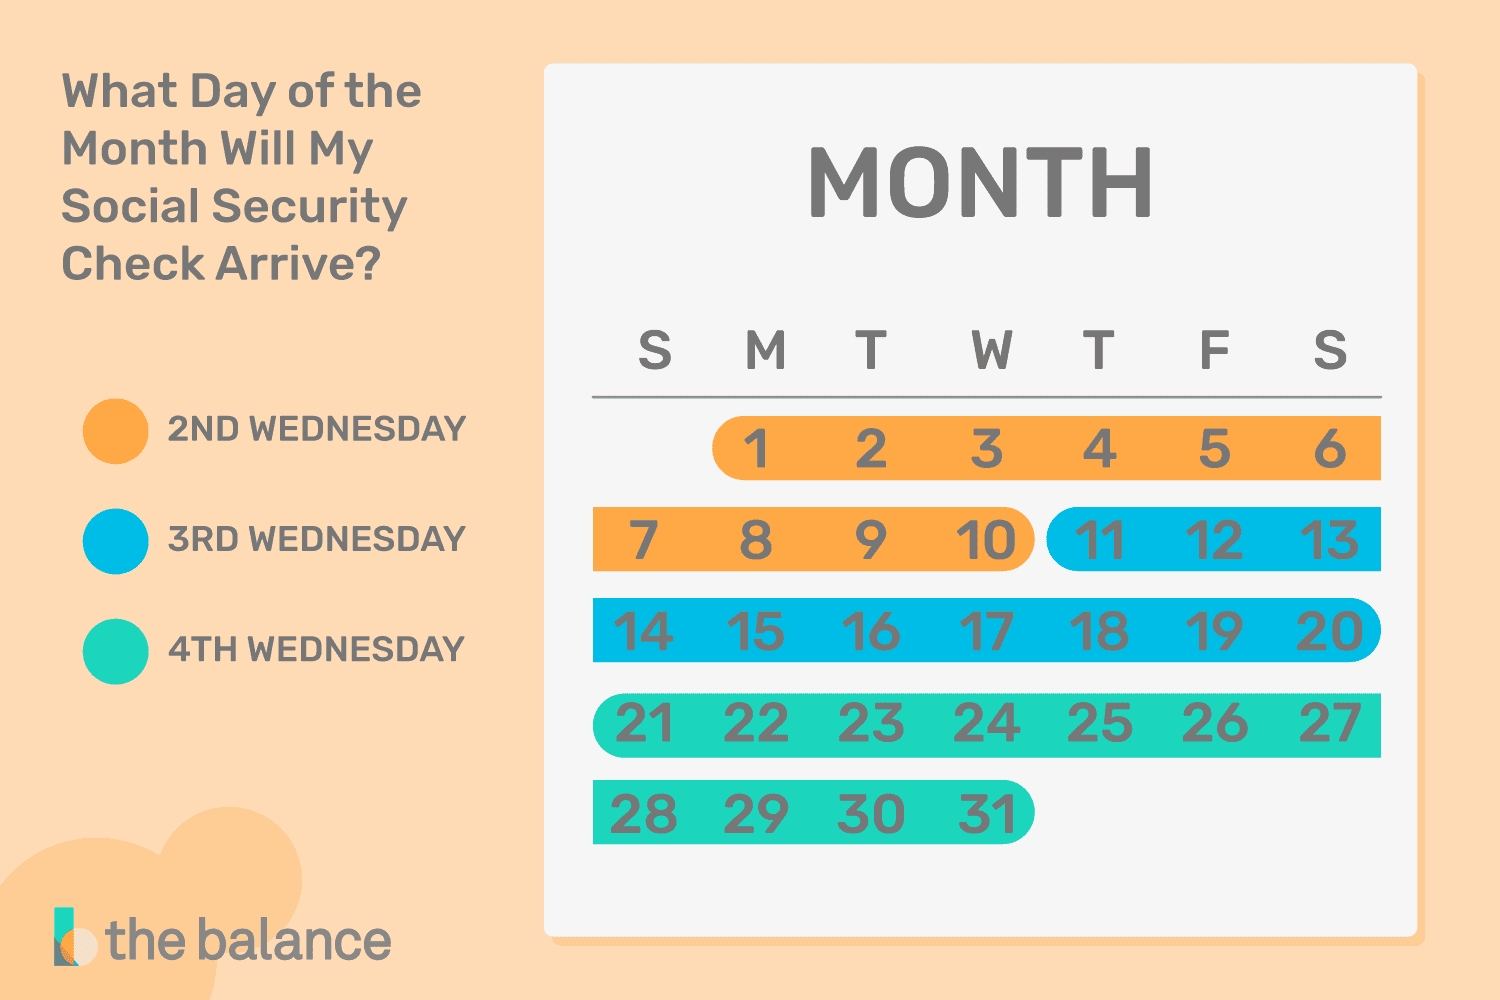 What Day Should My Social Security Payment Arrive?